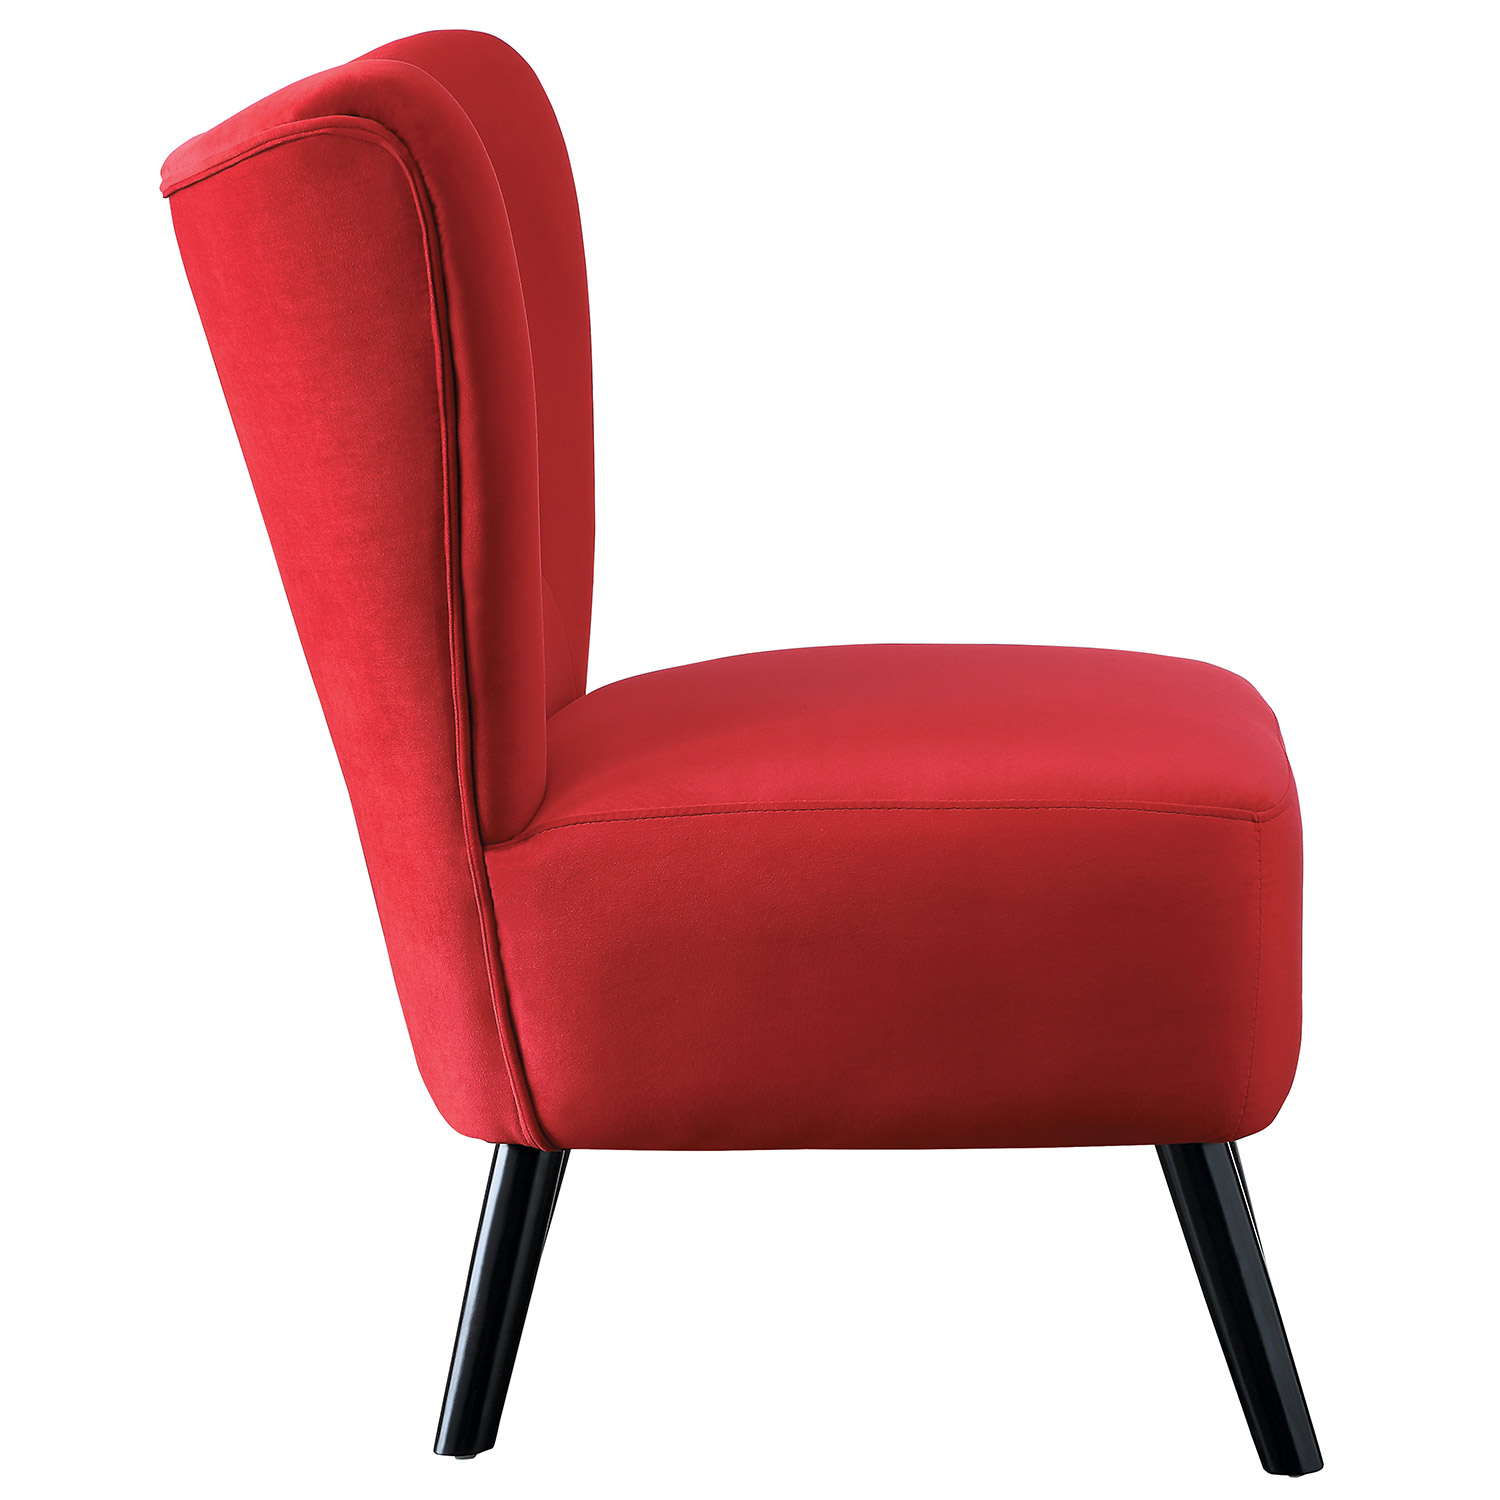 Homelegance Imani Accent Chair - Red